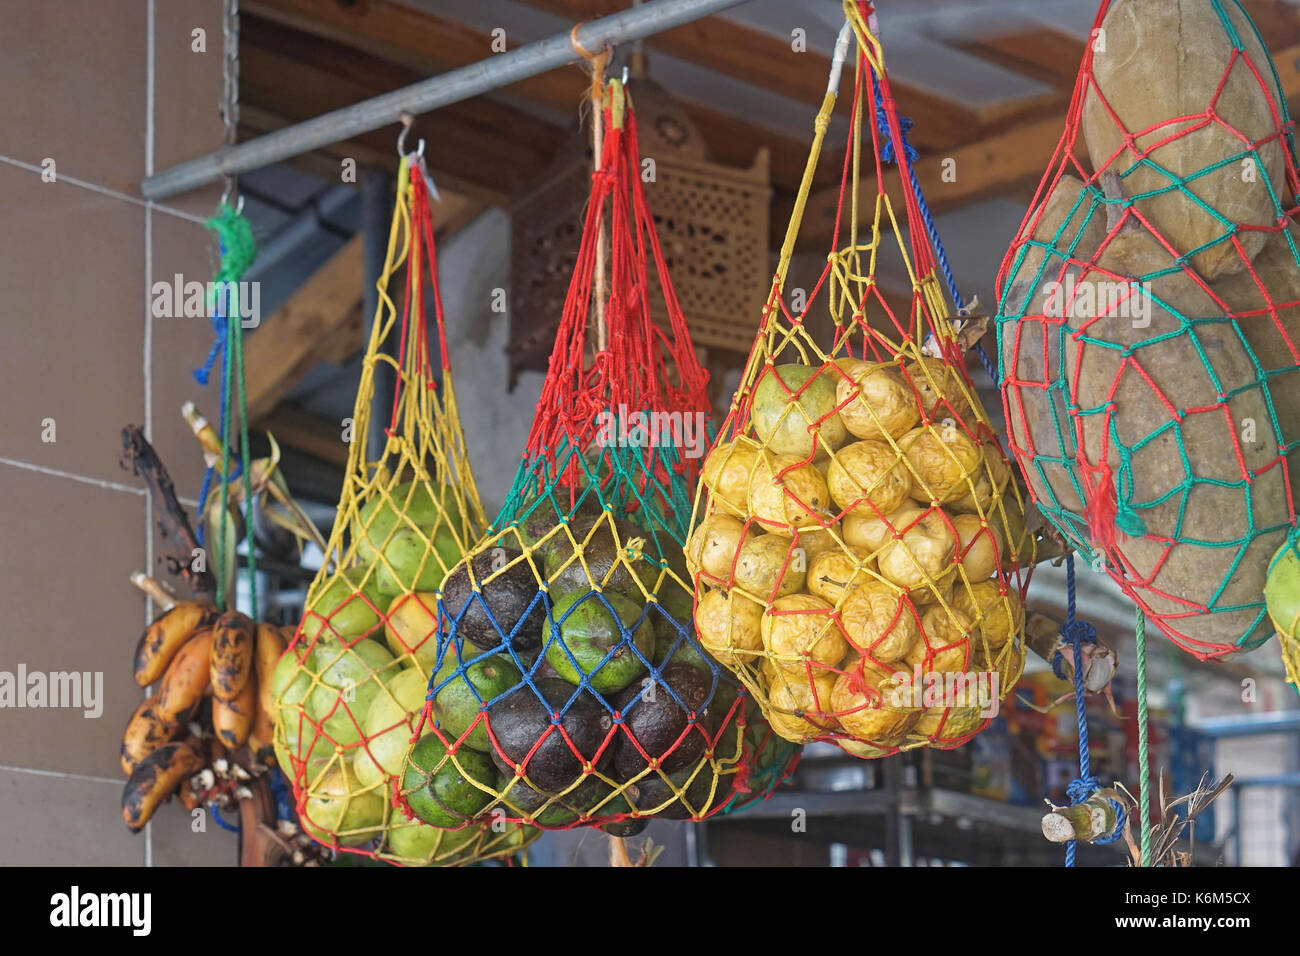 African tropical fruits in nets Stock Photo